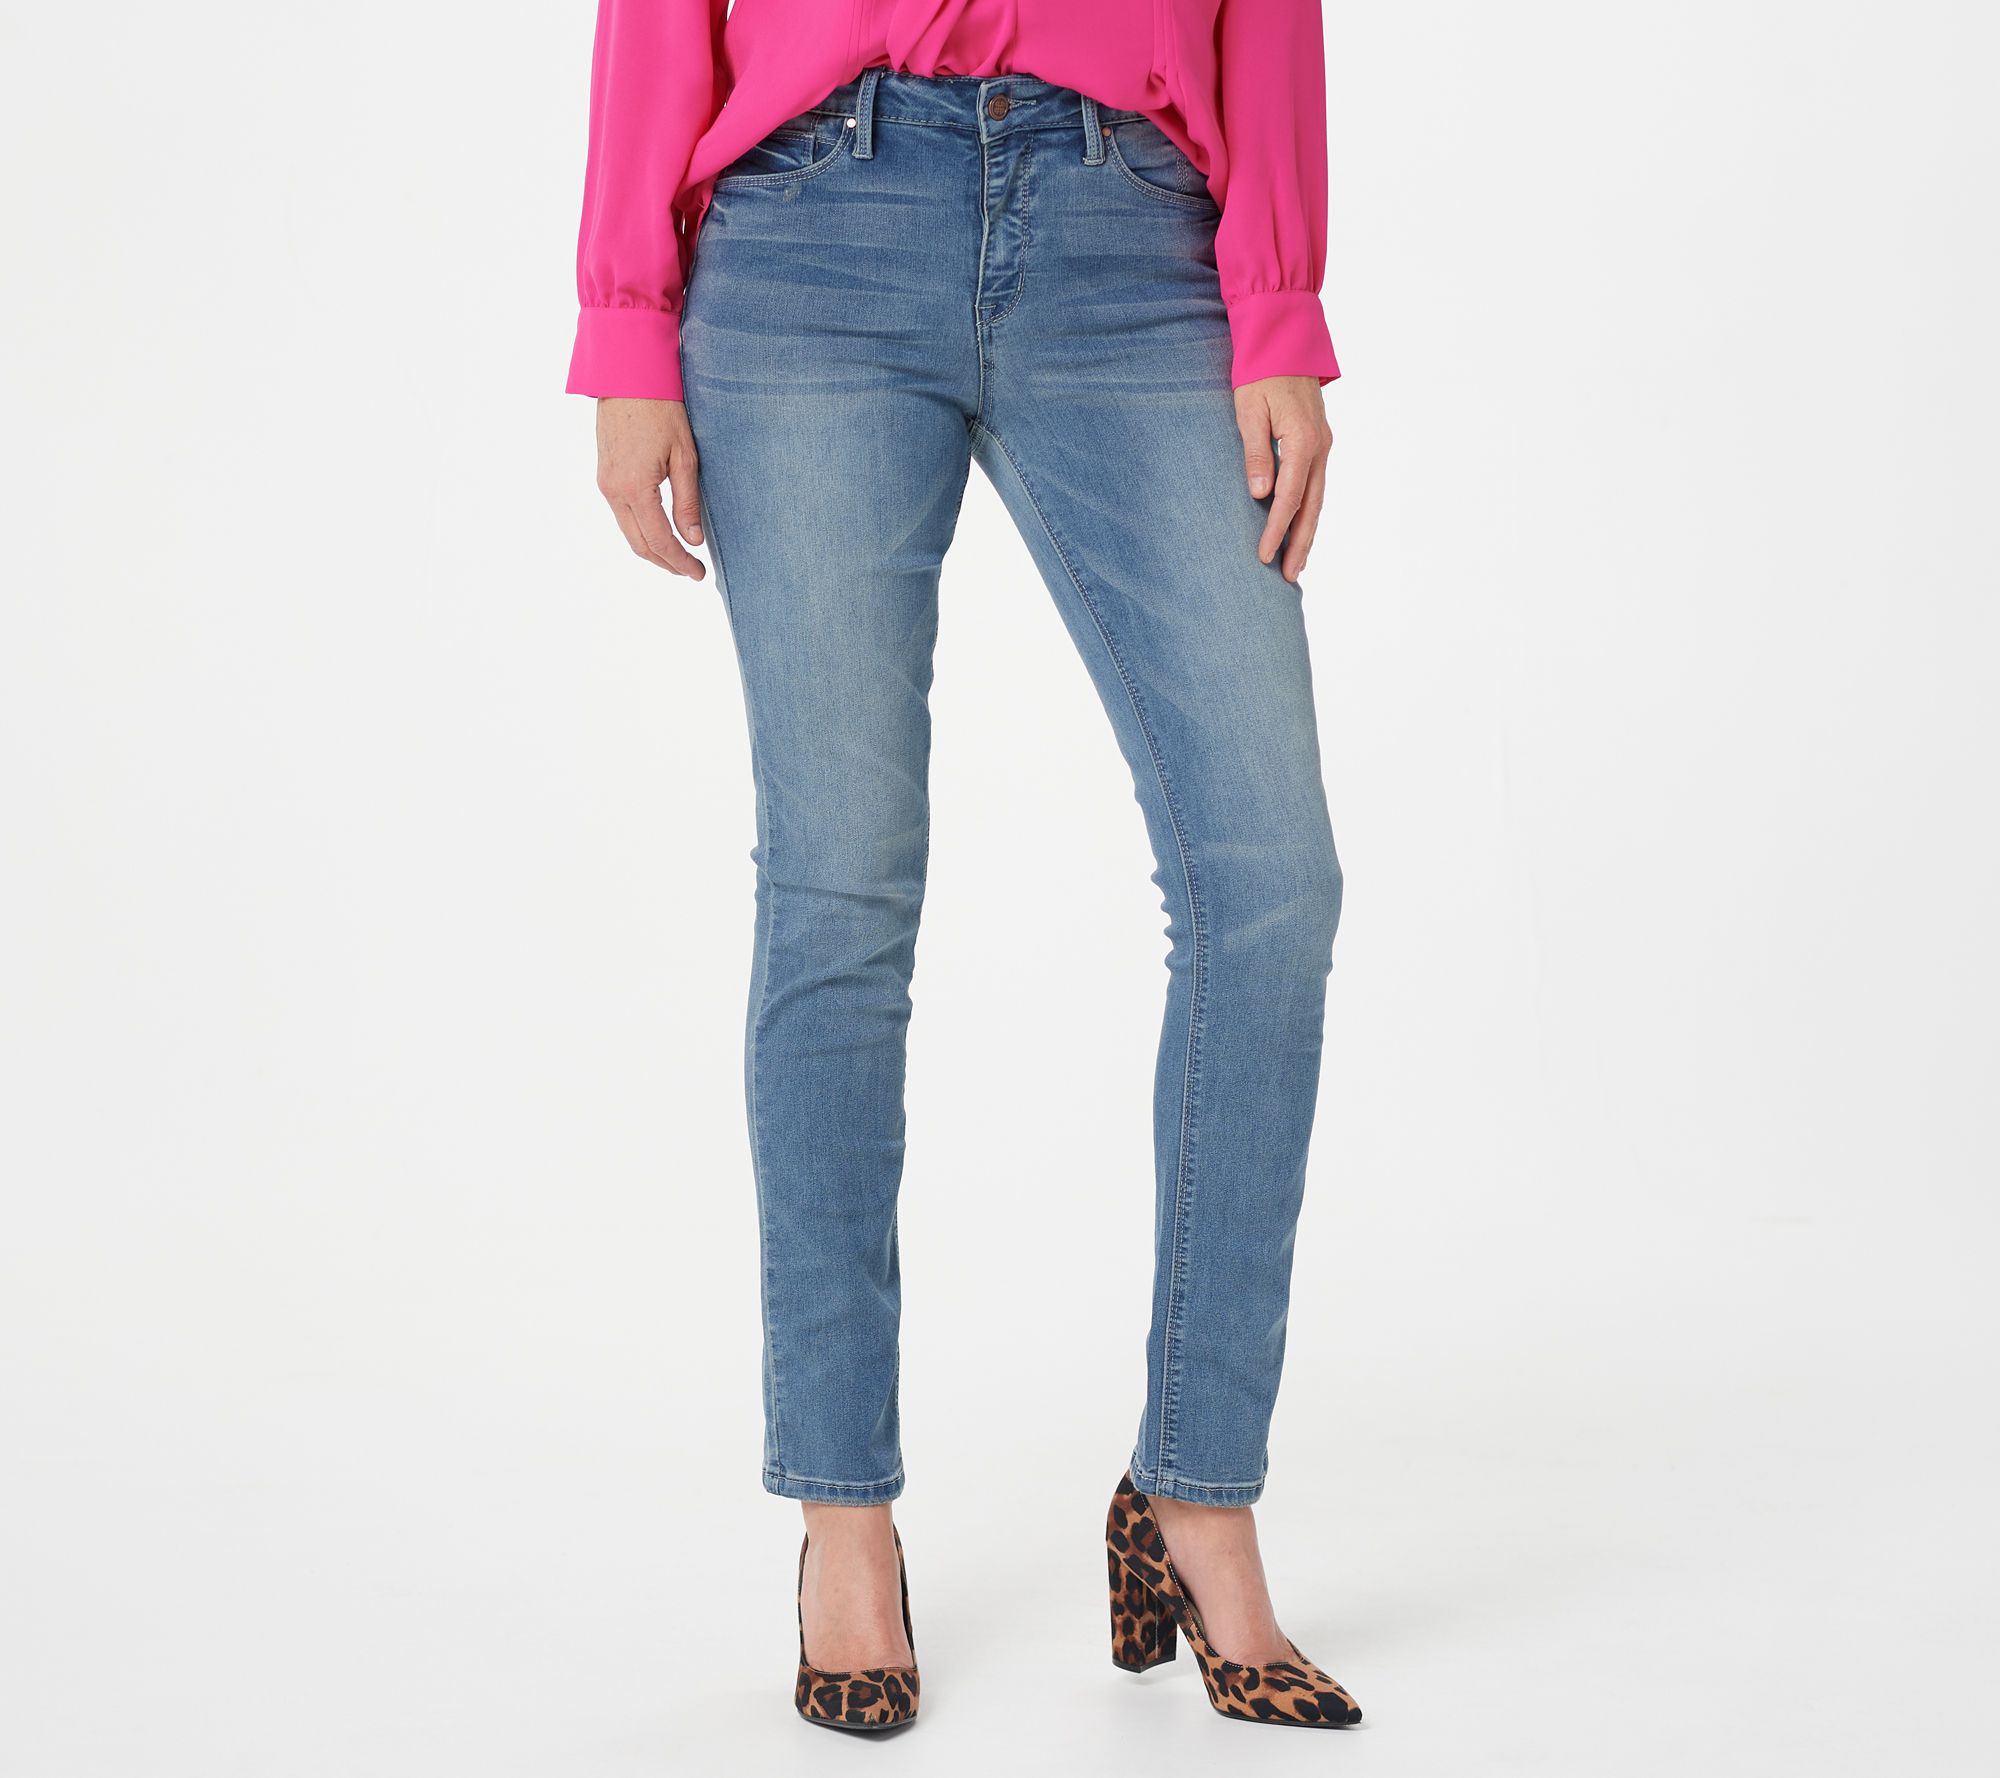 Going Out Tops To Wear With Jeans An Indigo Day, 49% OFF